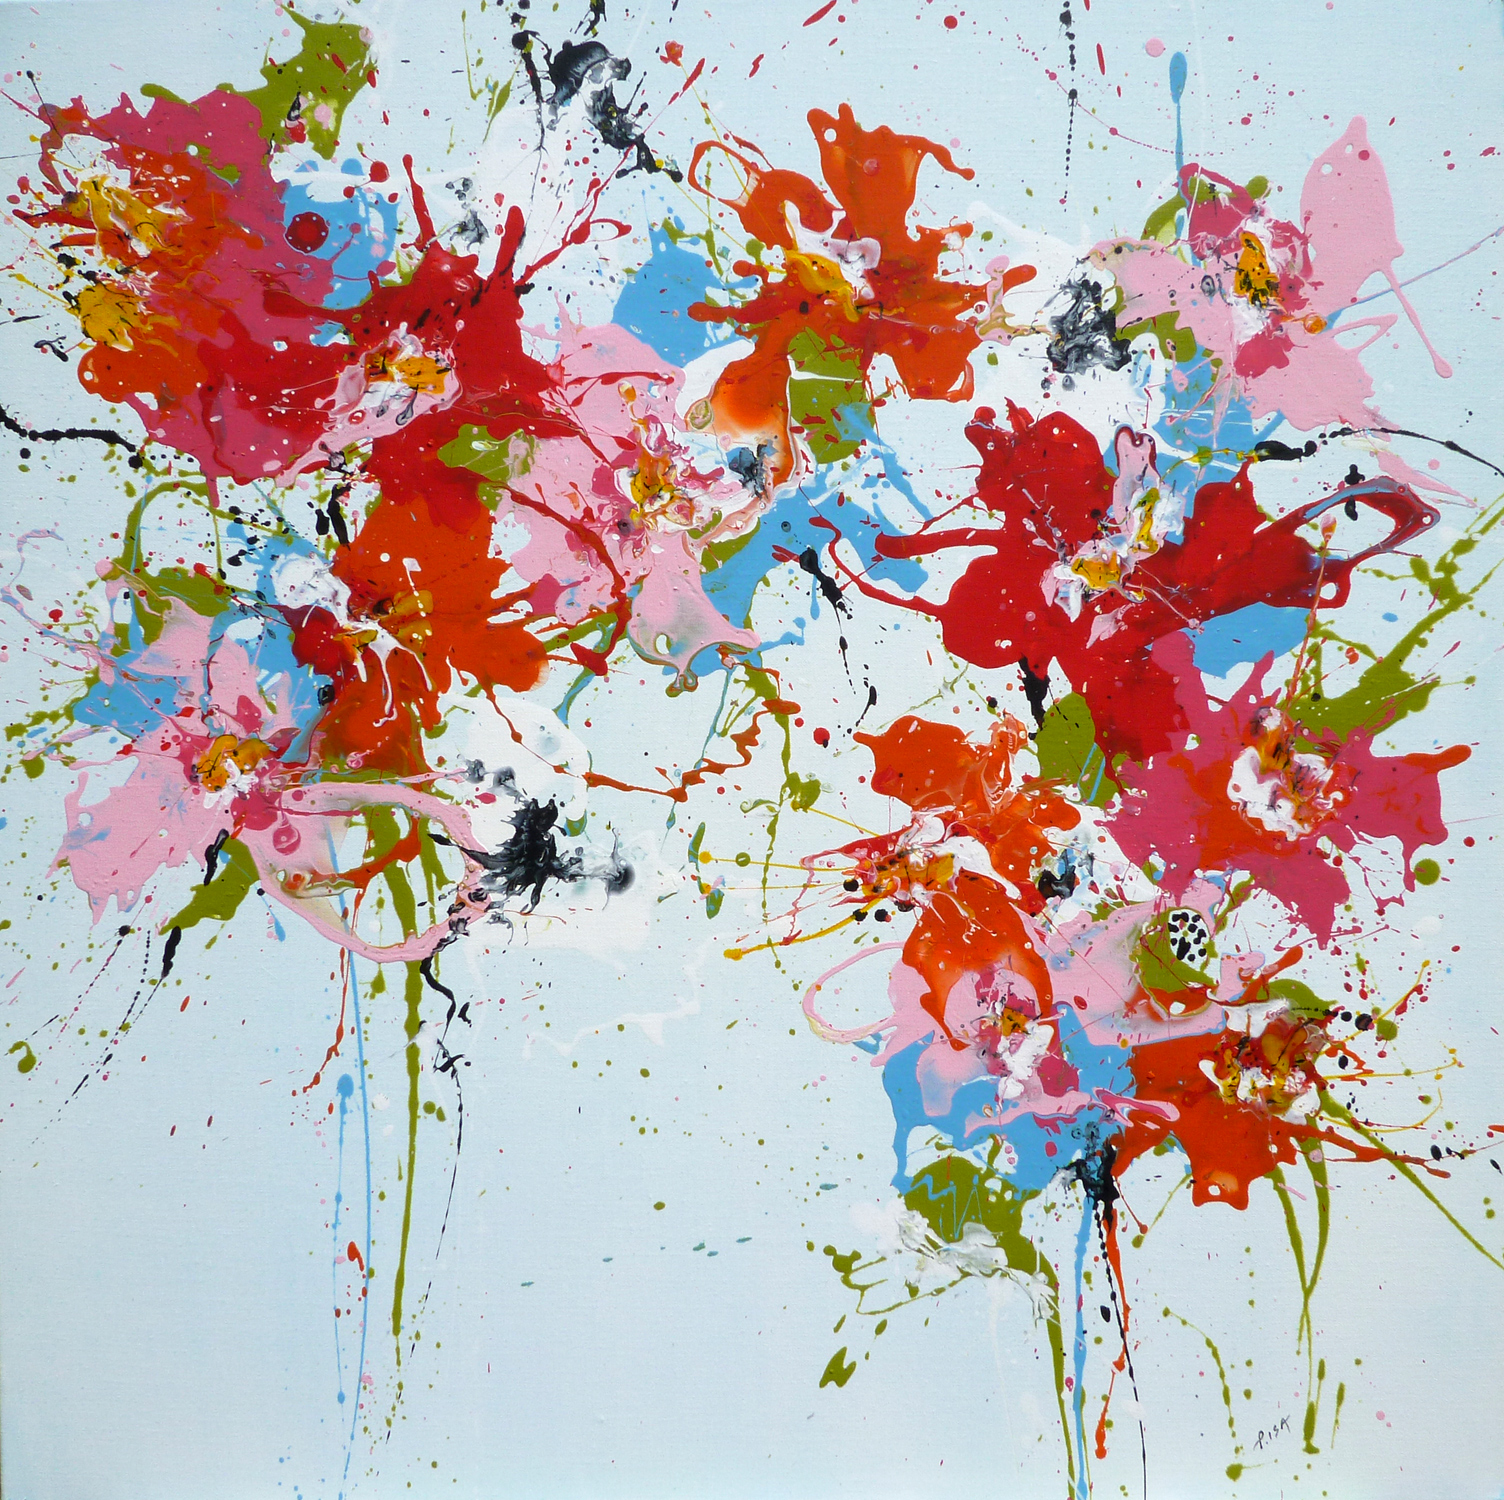 MEDIA : In the Siott Gallery Blog : “February Calls for Colorful Isabelle Pelletane Paintings.” (UK)